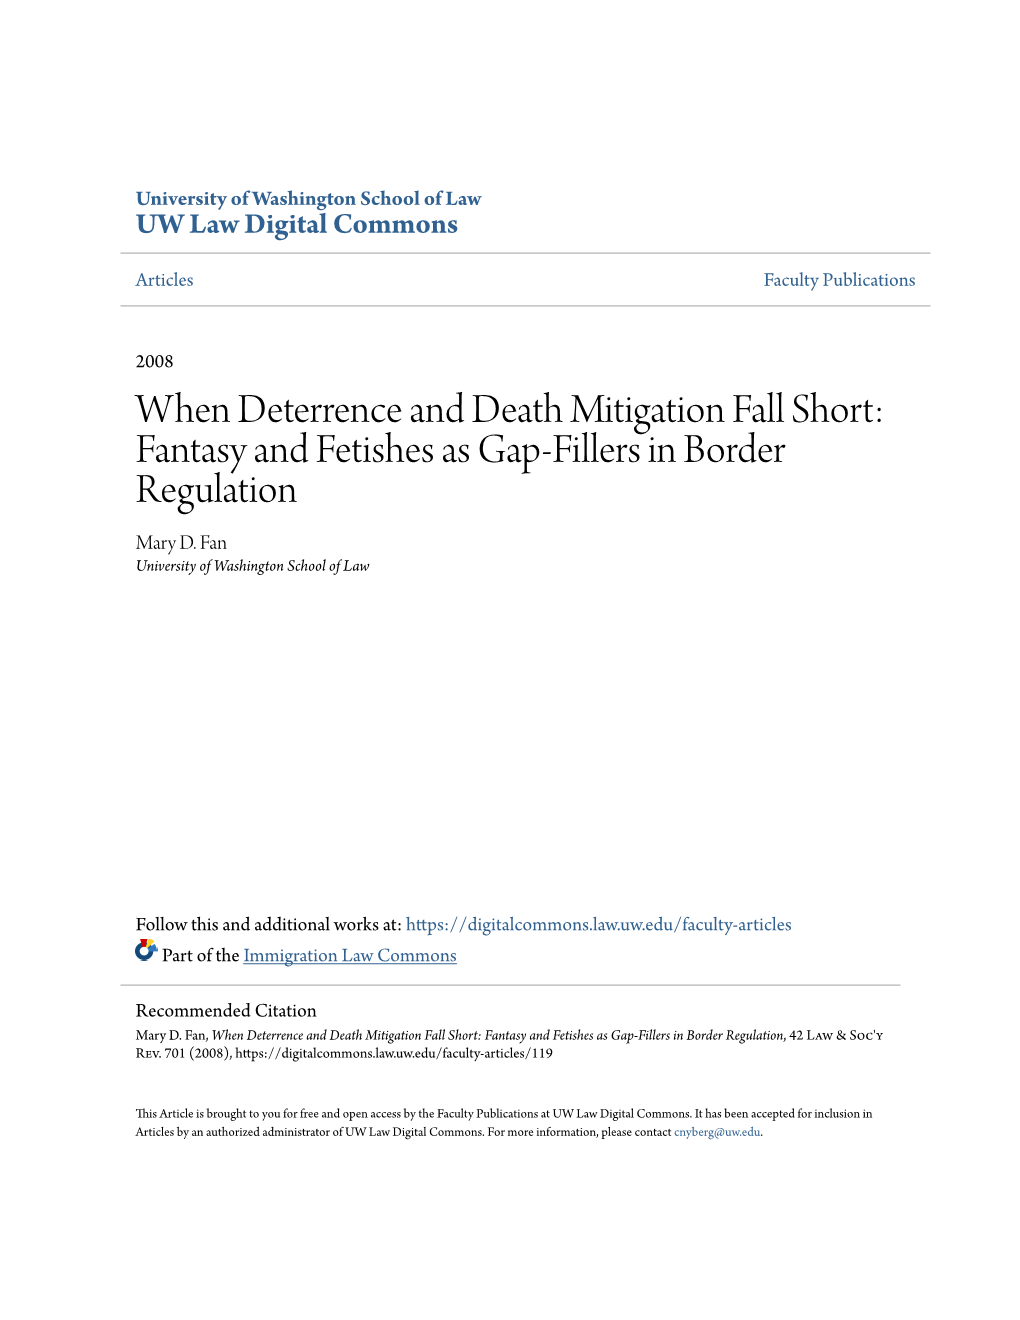 Fantasy and Fetishes As Gap-Fillers in Border Regulation Mary D